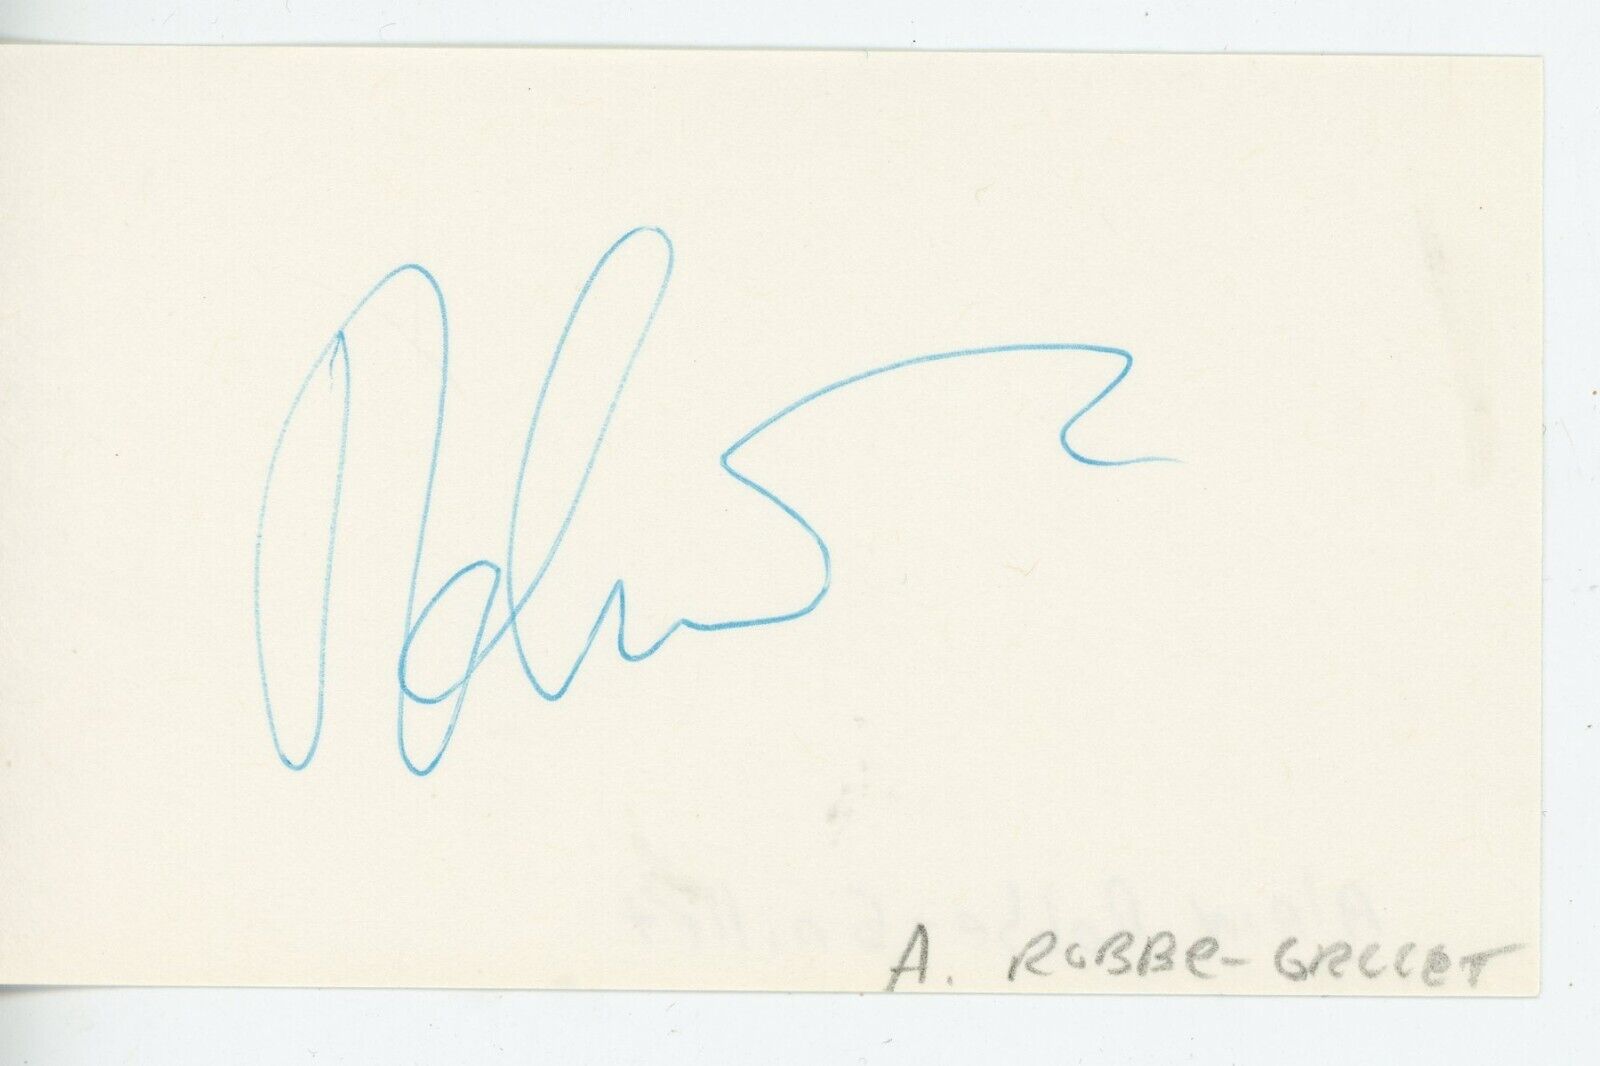 Famed French author & screenwriter Alain Robbe-Grillet & his autograph